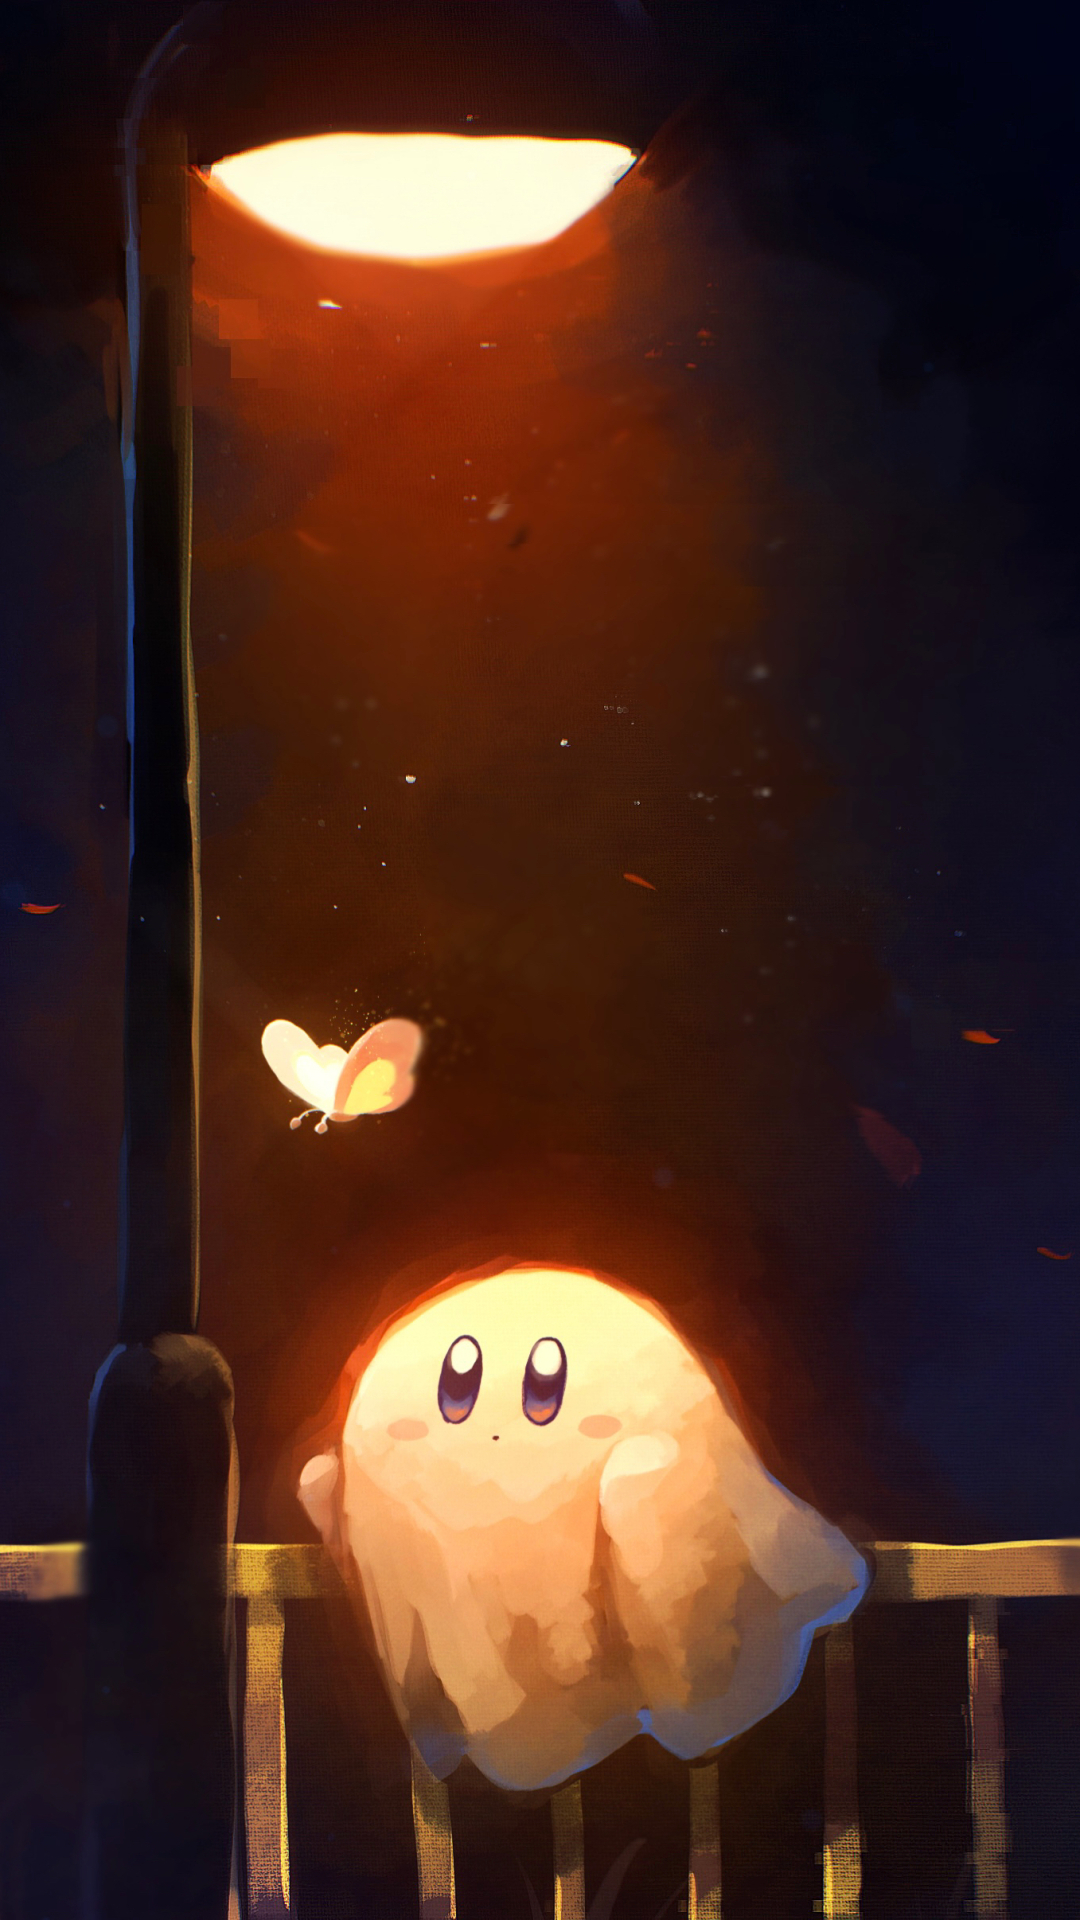 Kirby Phone Wallpaper by すびかか